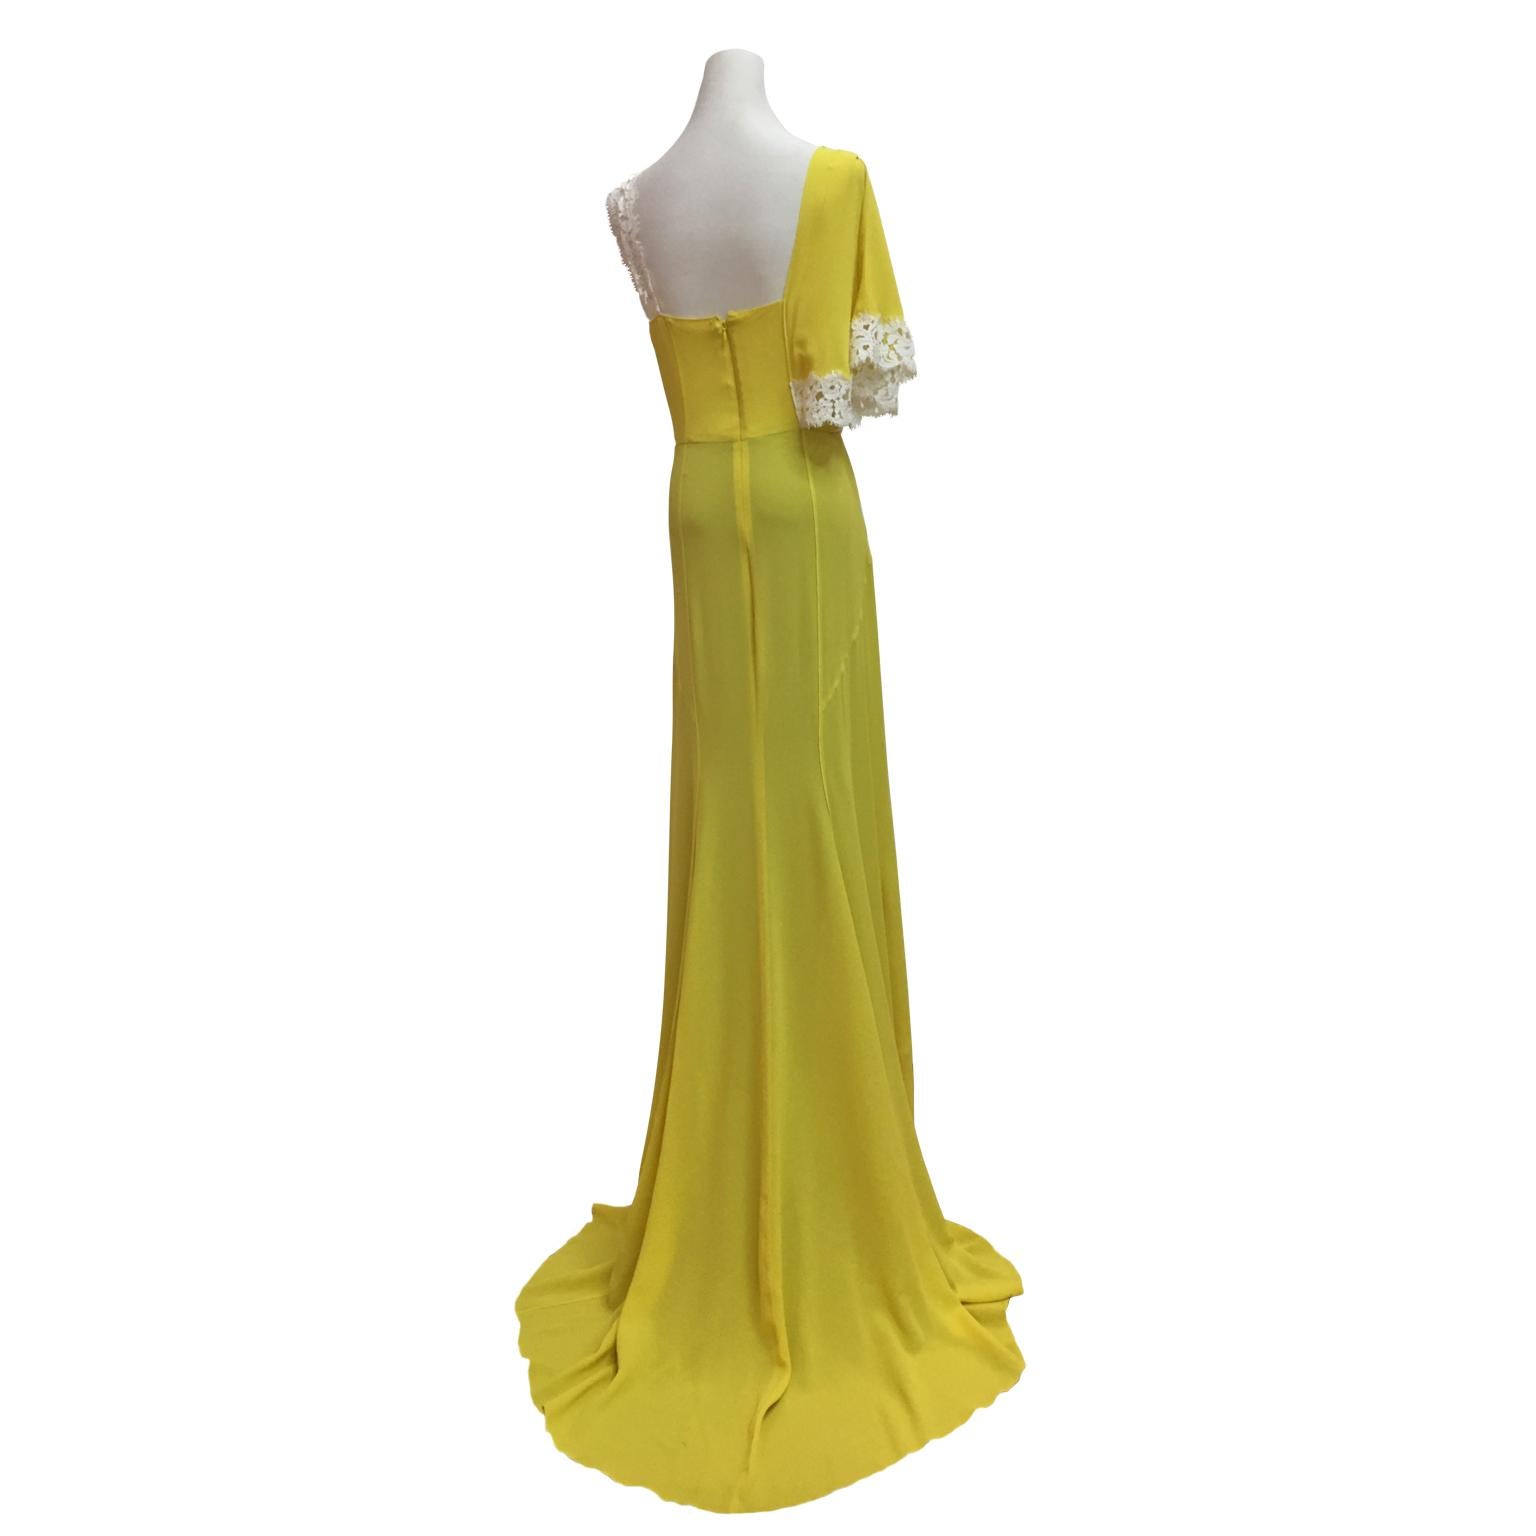 Nina Ricci Olivier Theyskens Sample Dress Gown Yellow Black Lace circa 2010 For Sale 1